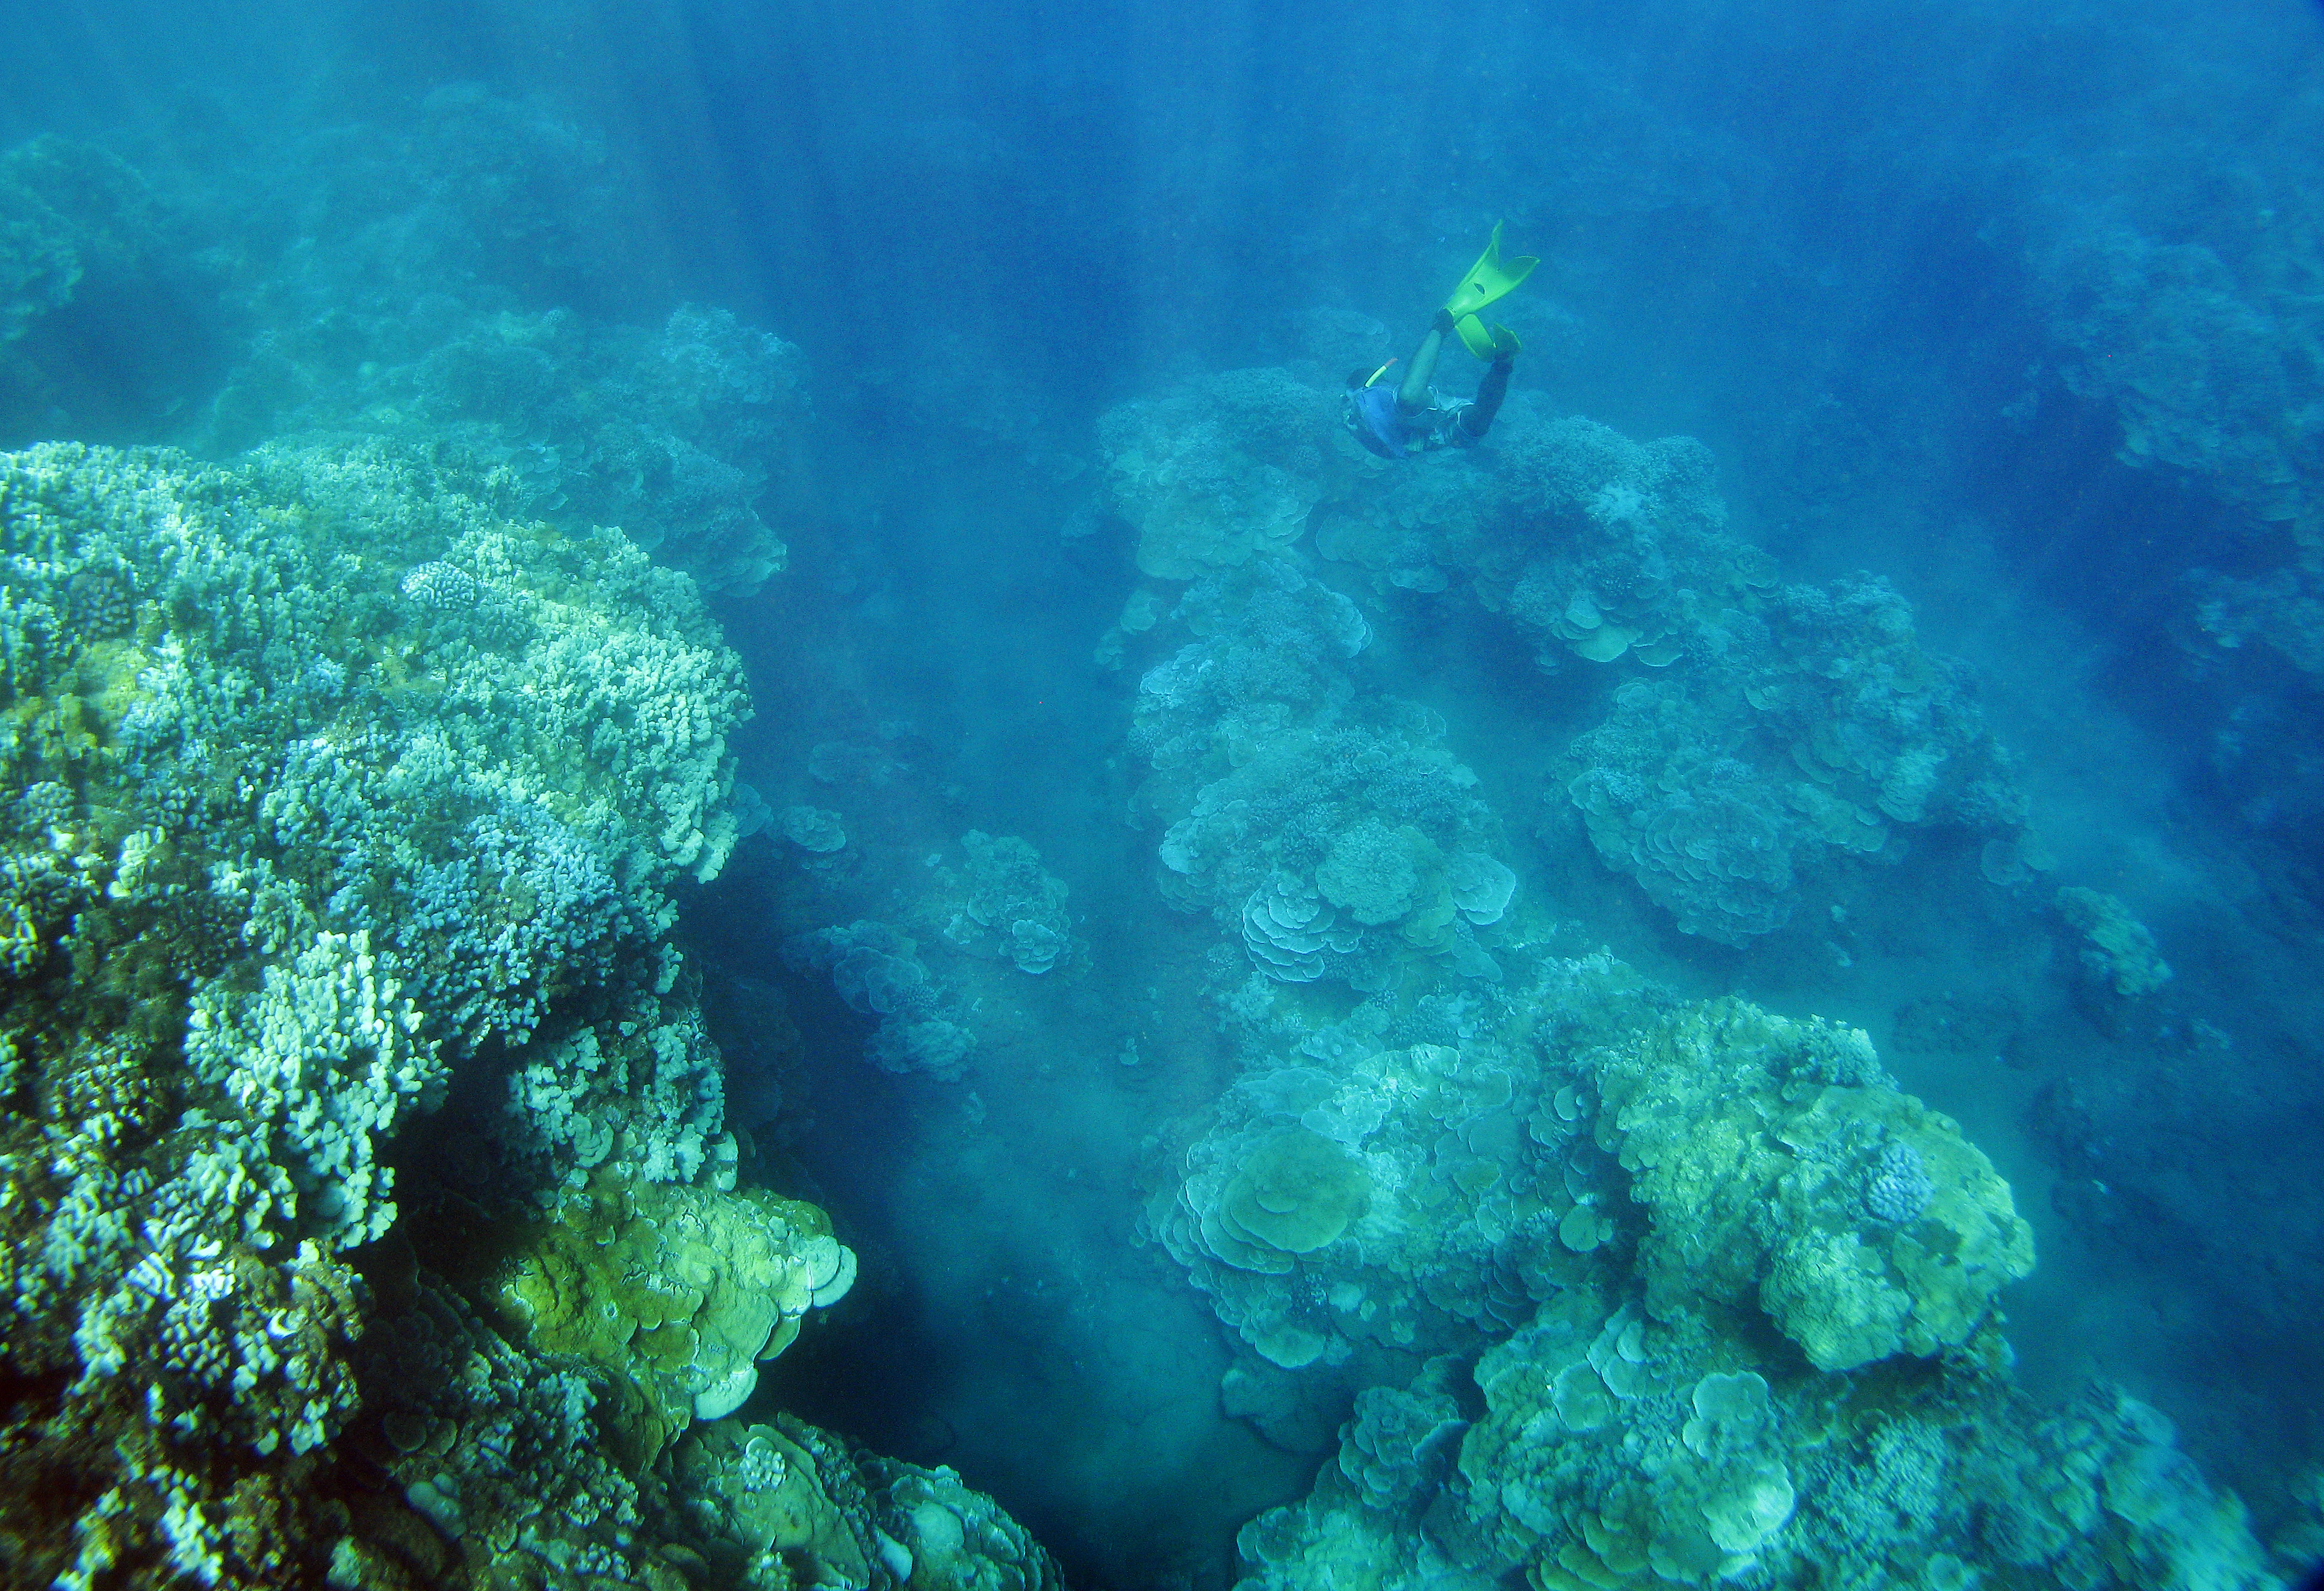 Underwater view looking down at a diver swimming among huge coral reefs.